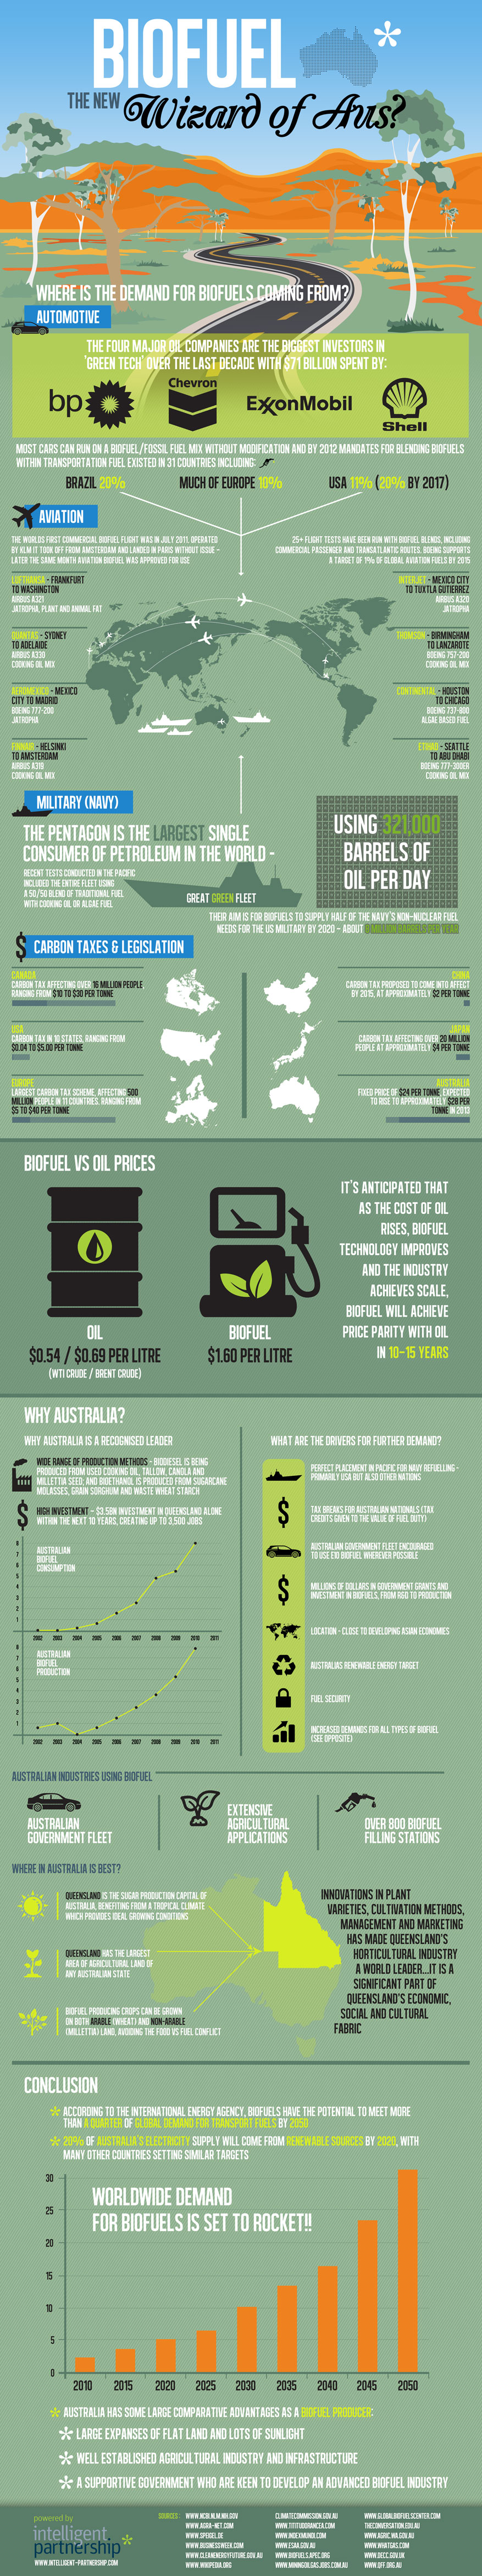 Biofuel - The New Wizard of Aus?